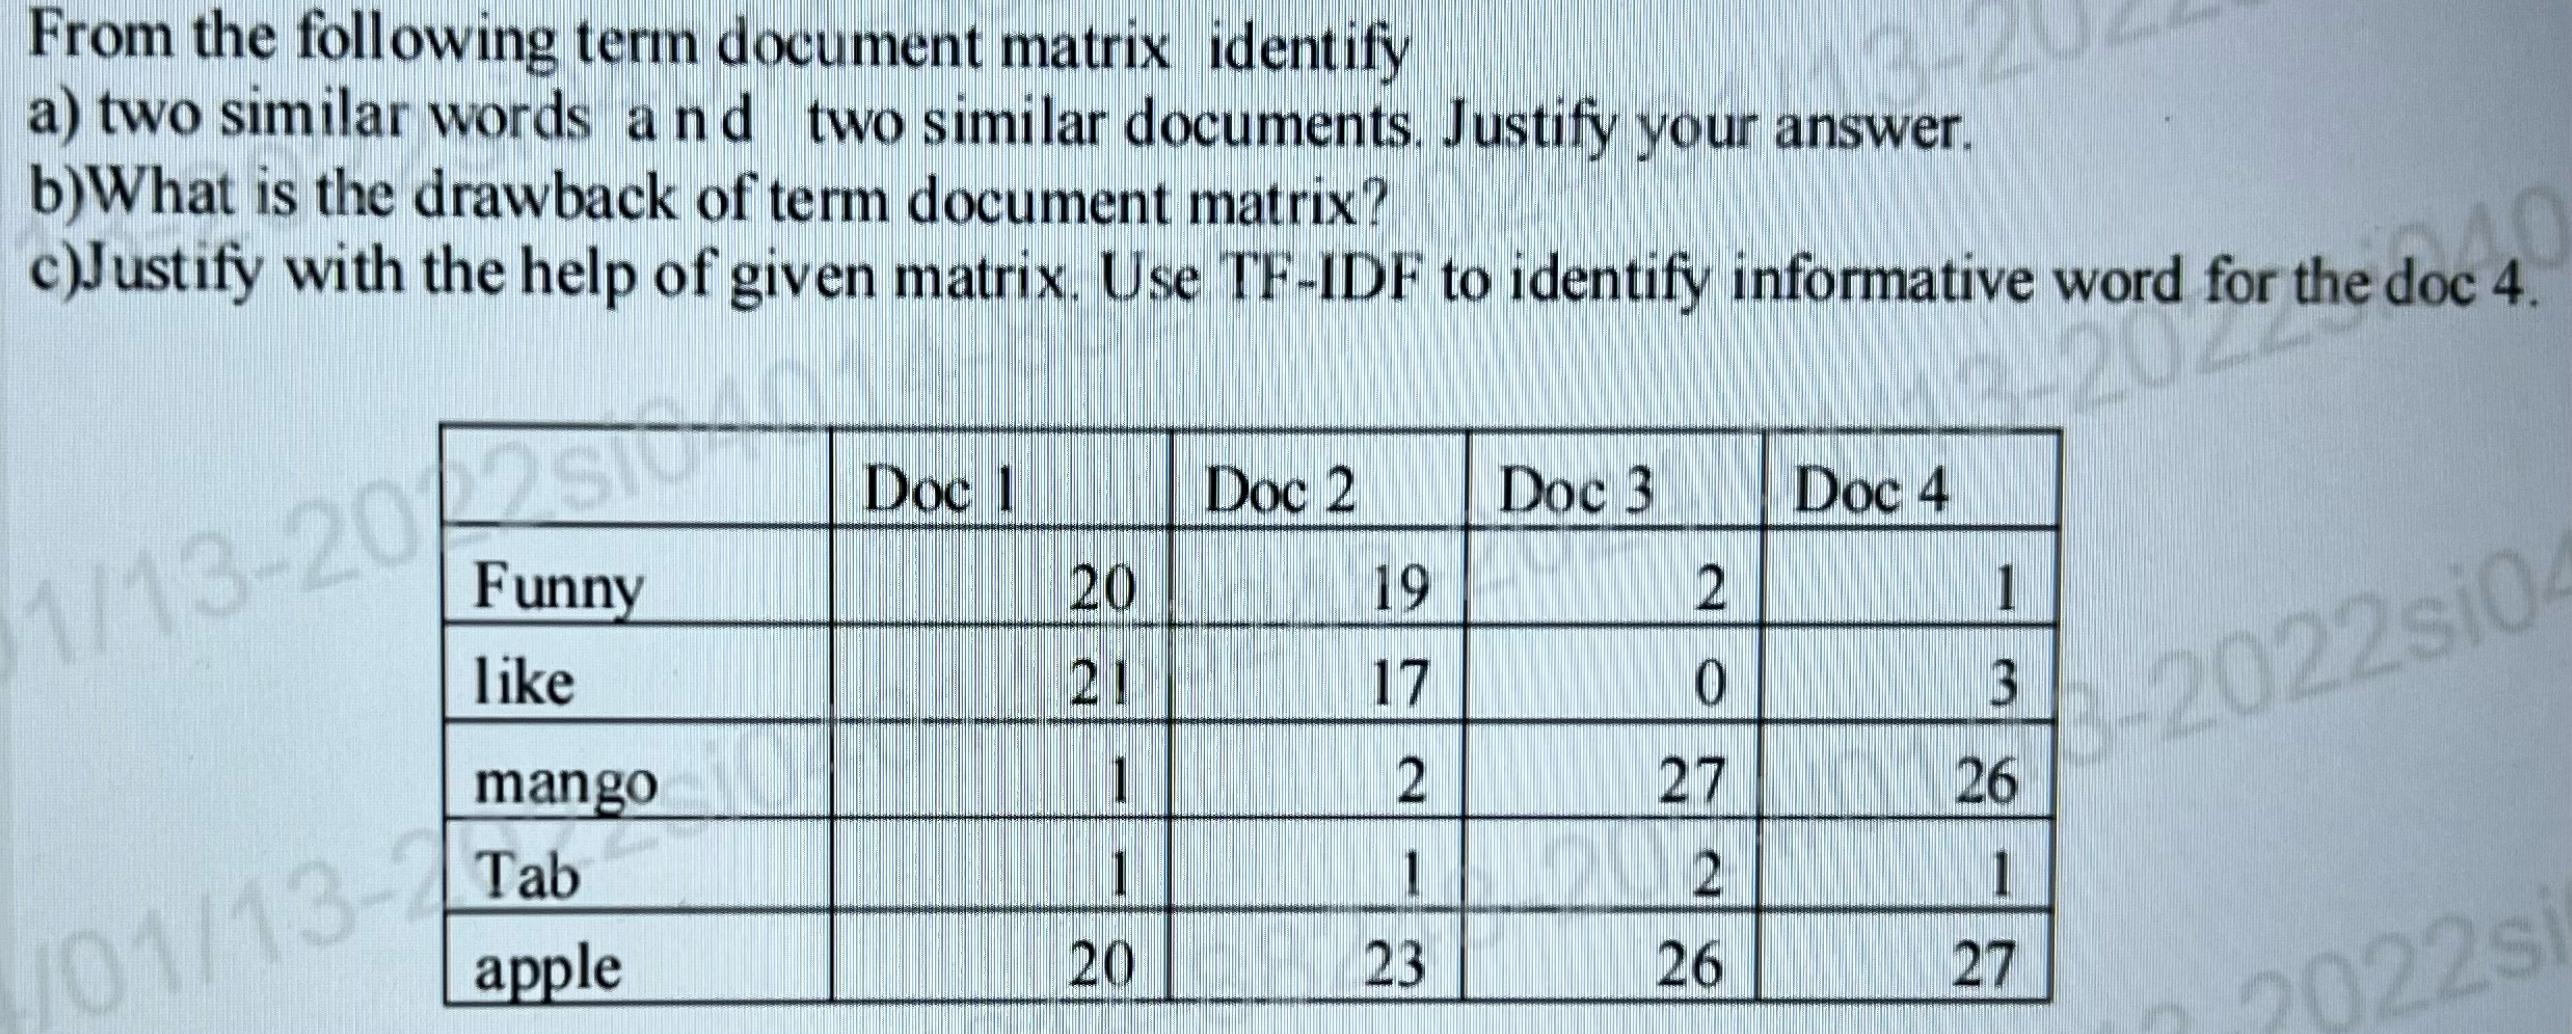 From the following term document matrix identify a) two similar words and two similar documents. Justify your